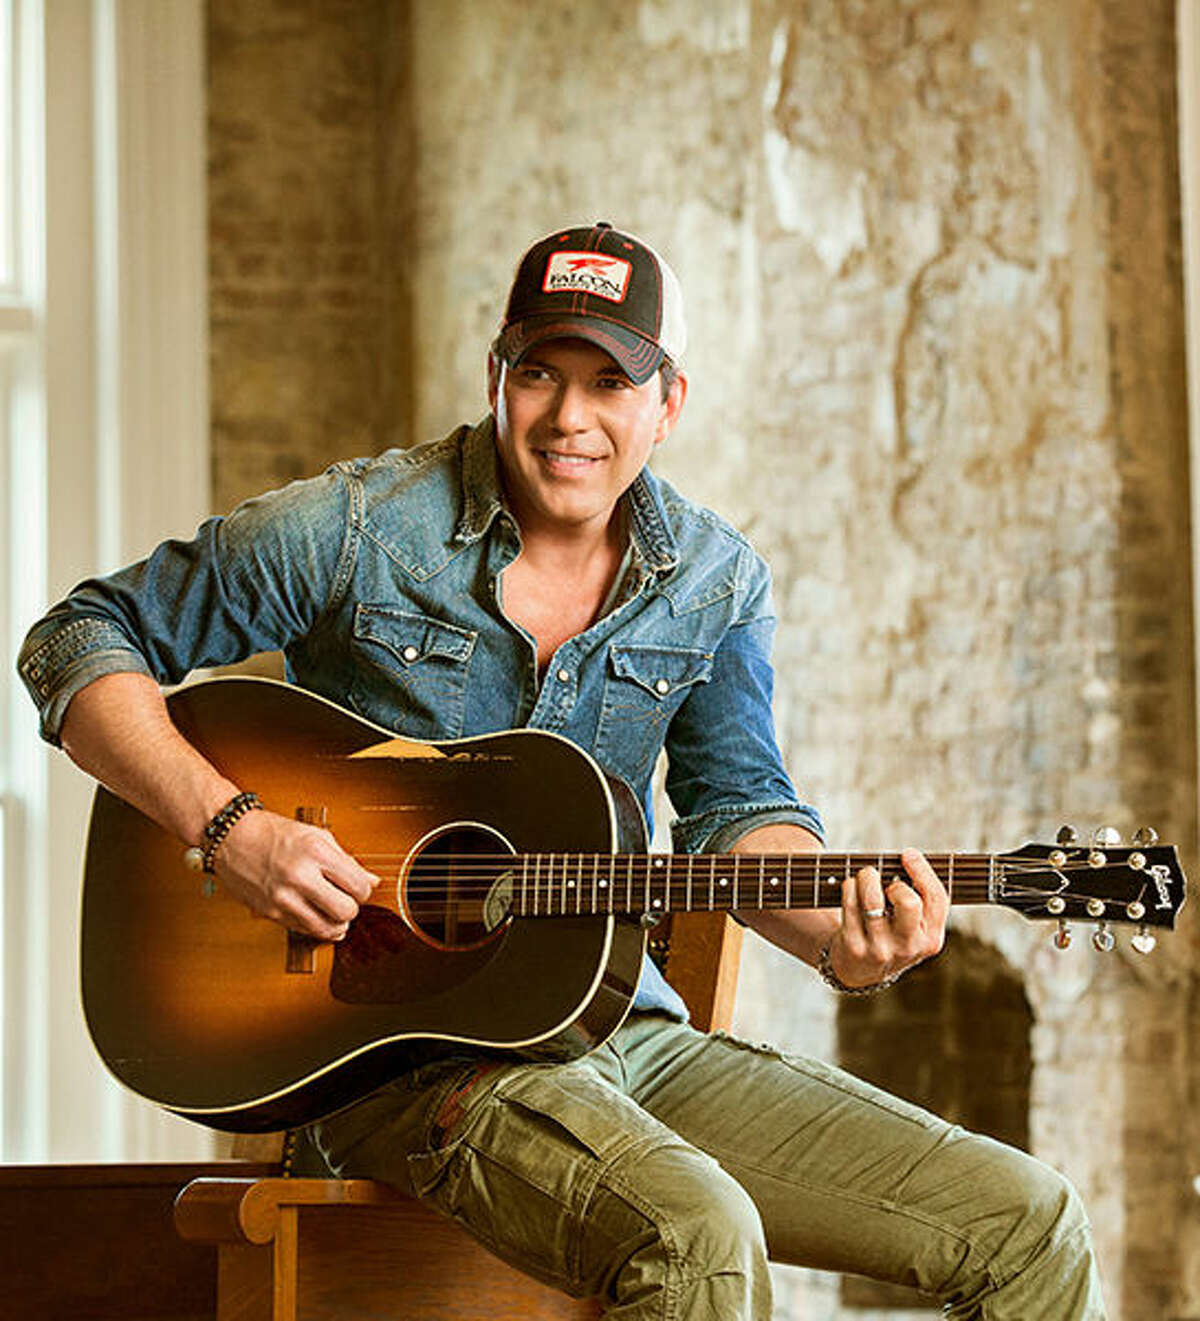 Rodney Atkins will perform July 16 at the Liberty Bank Alton Amphitheater for Seniors Services Plus' 7th Annual Feed the Need benefit concert.  